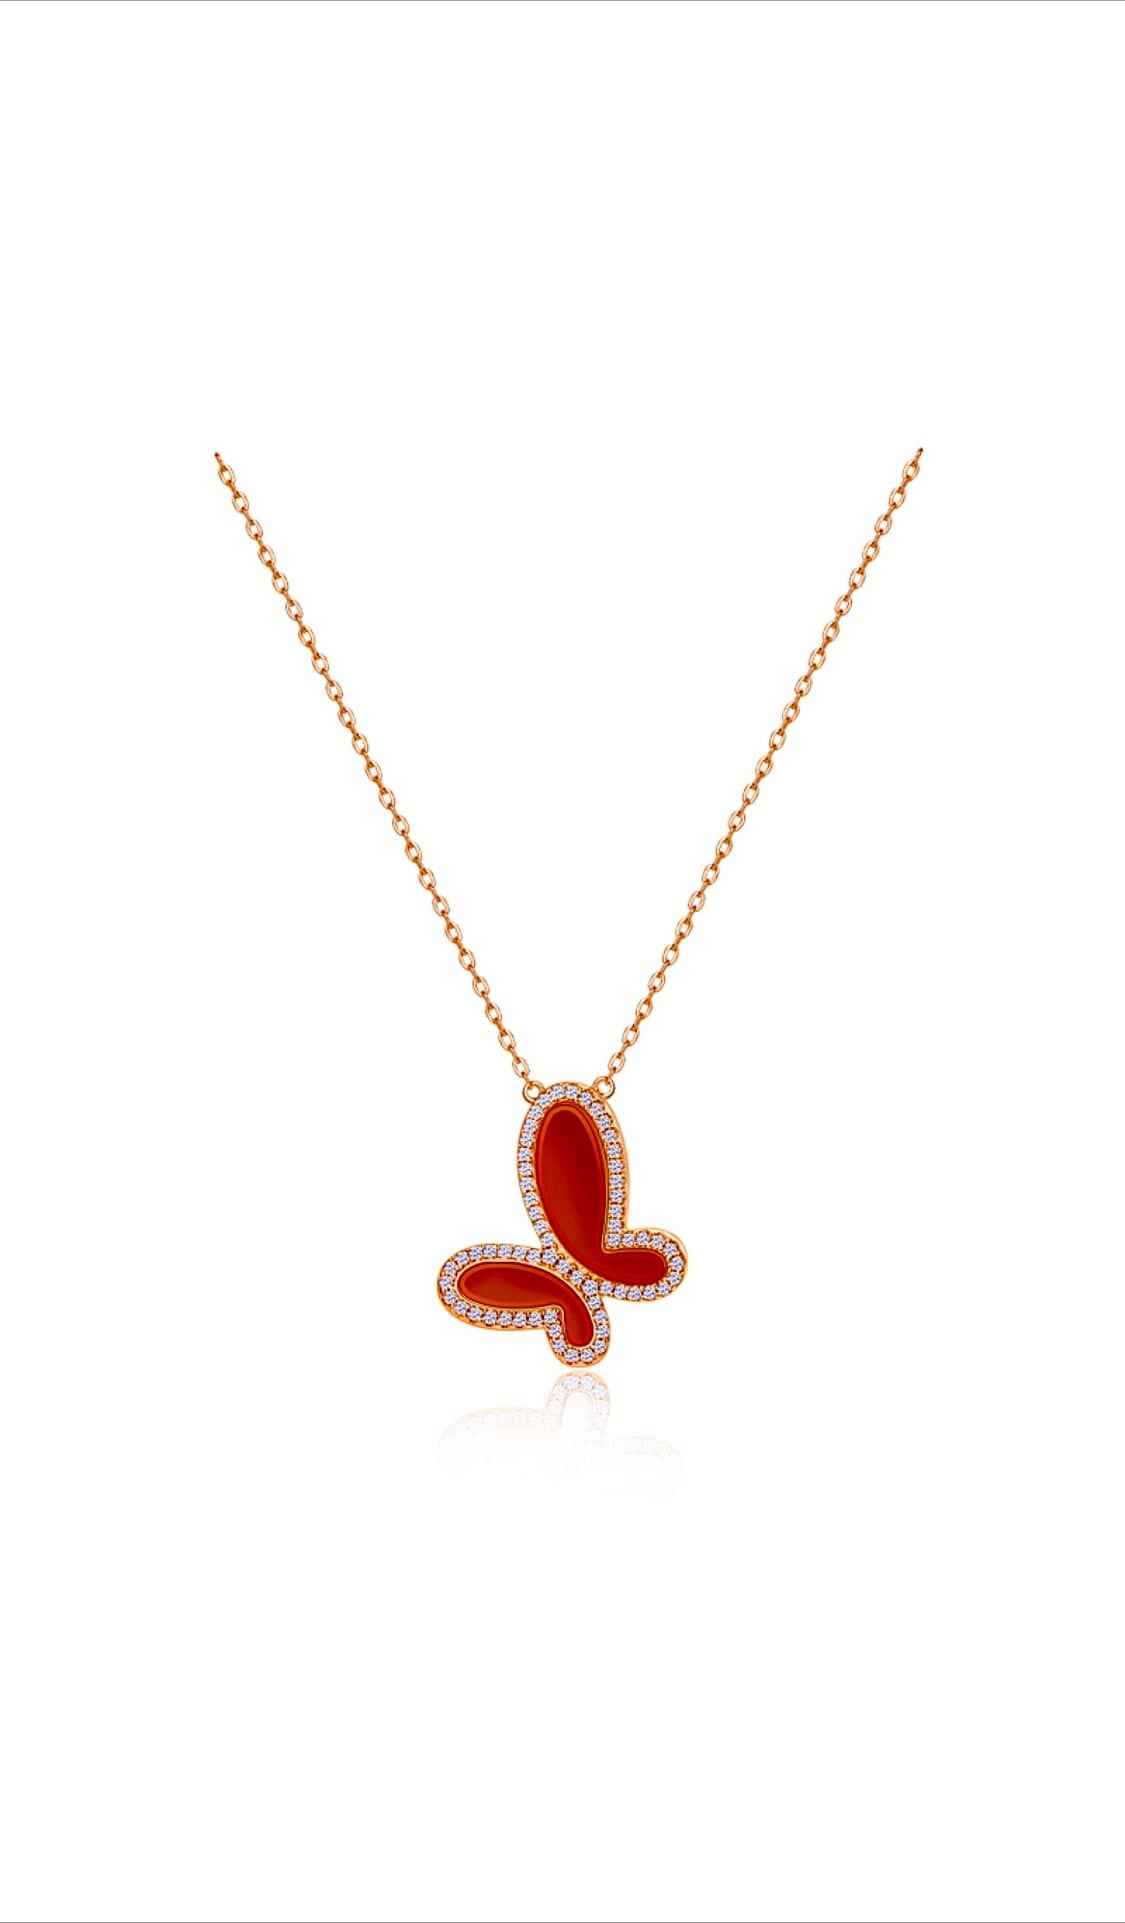 Necklace Agate Red Agate w/ 18k Gold & Cubic Zirconia Butterfly Necklace Jewelry Red Agate18k Gold Cubic Zirconia Butterfly Necklace Jewelry Olga Nikoza Swimwear